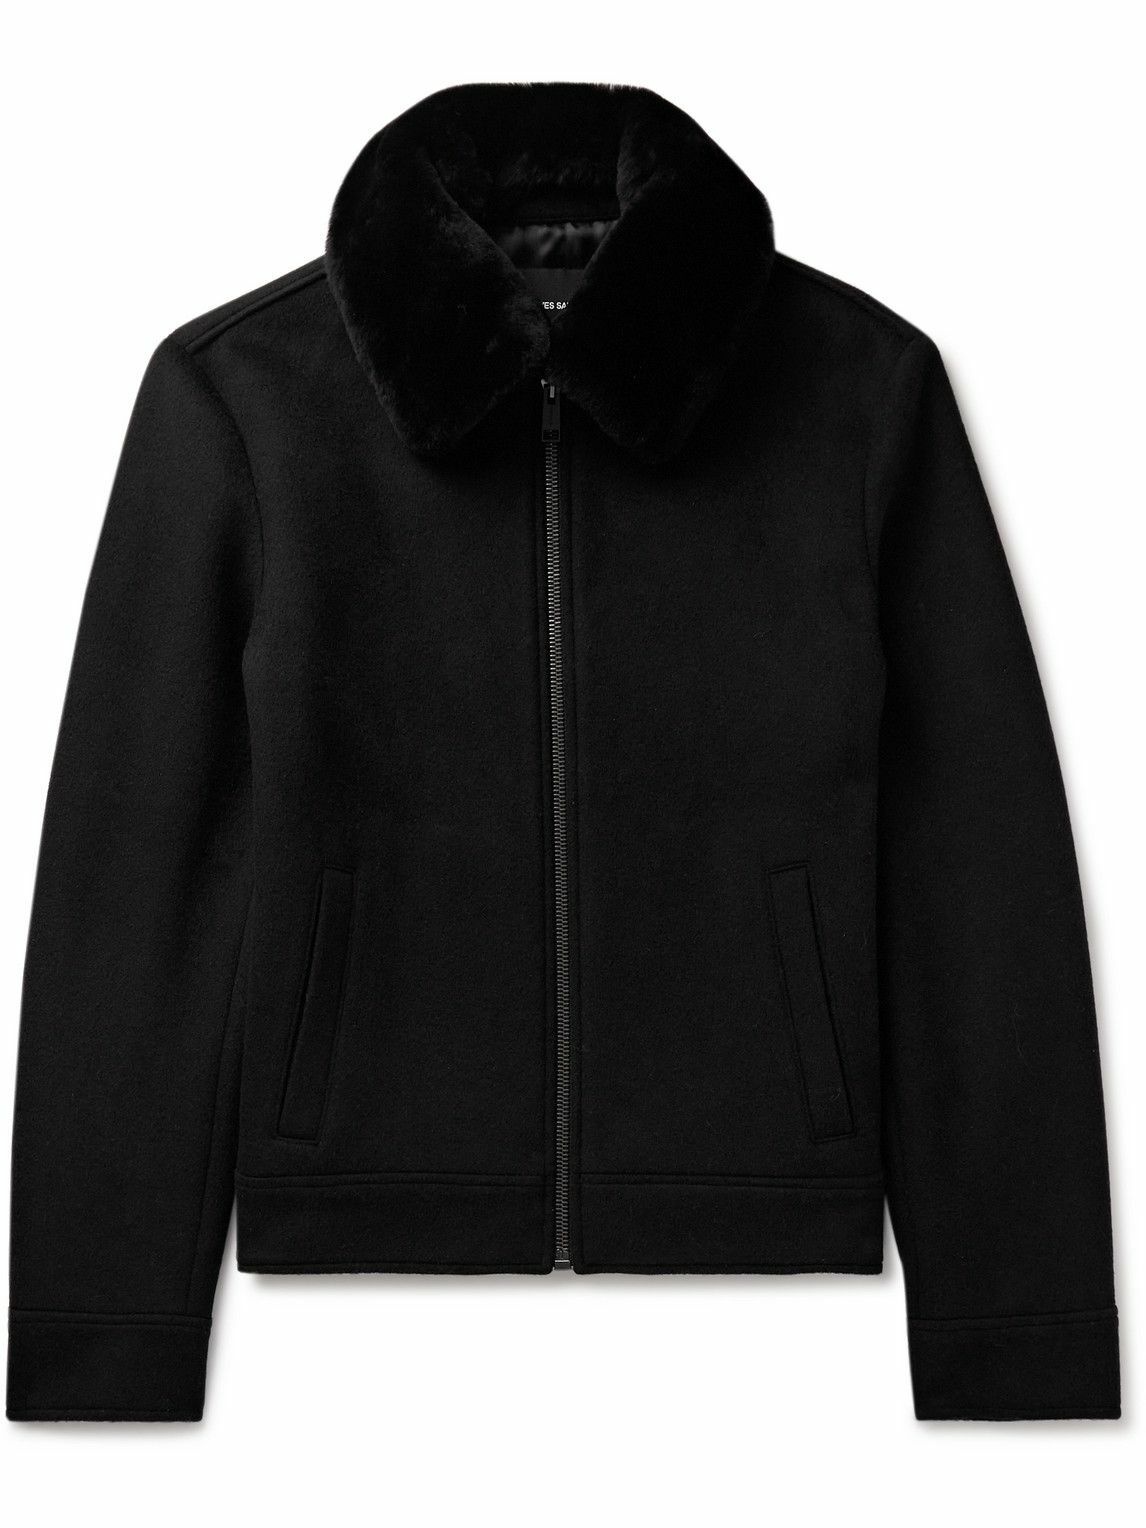 Yves Salomon - Shearling-Trimmed Wool and Cashmere-Blend Jacket - Black ...